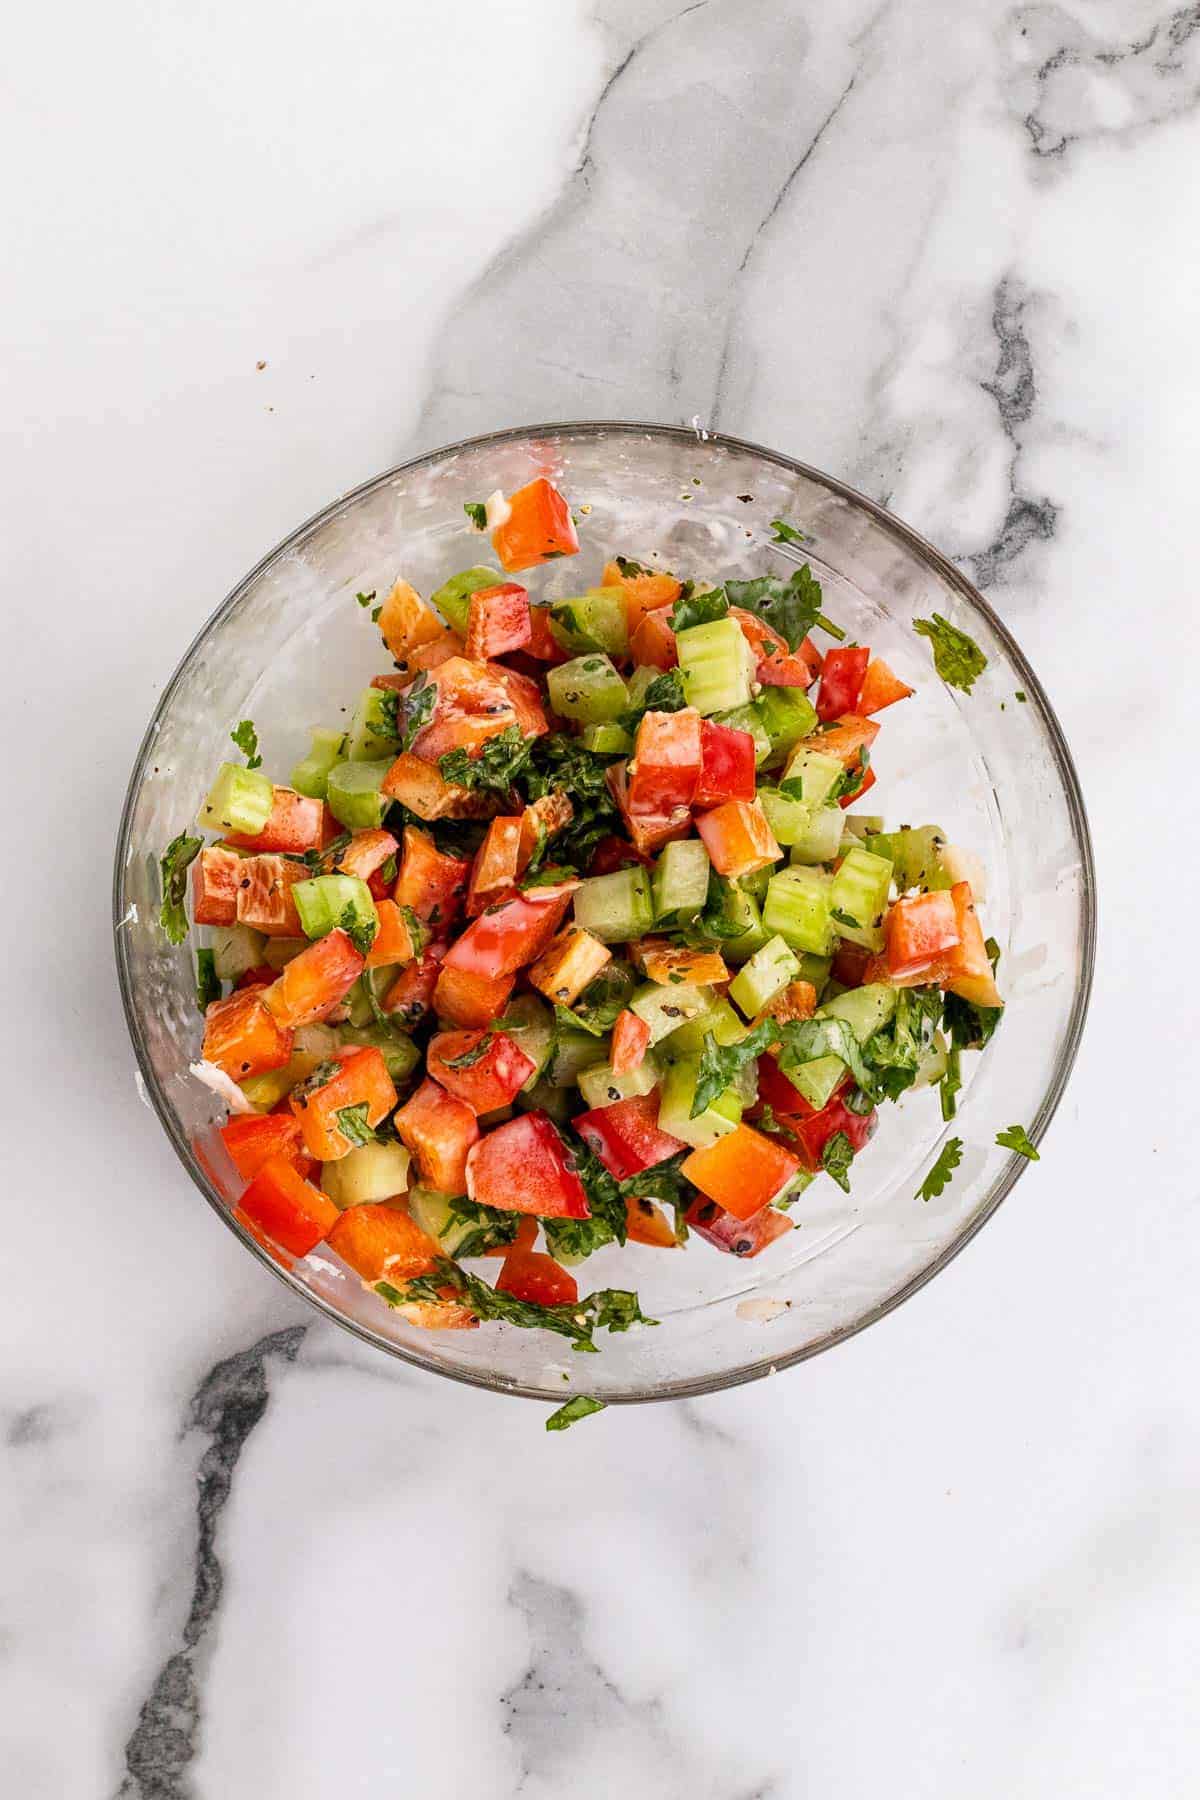 Bell peppers, celery, cilantro, salt, and dressing mixed together in a glass bowl, as seen from above